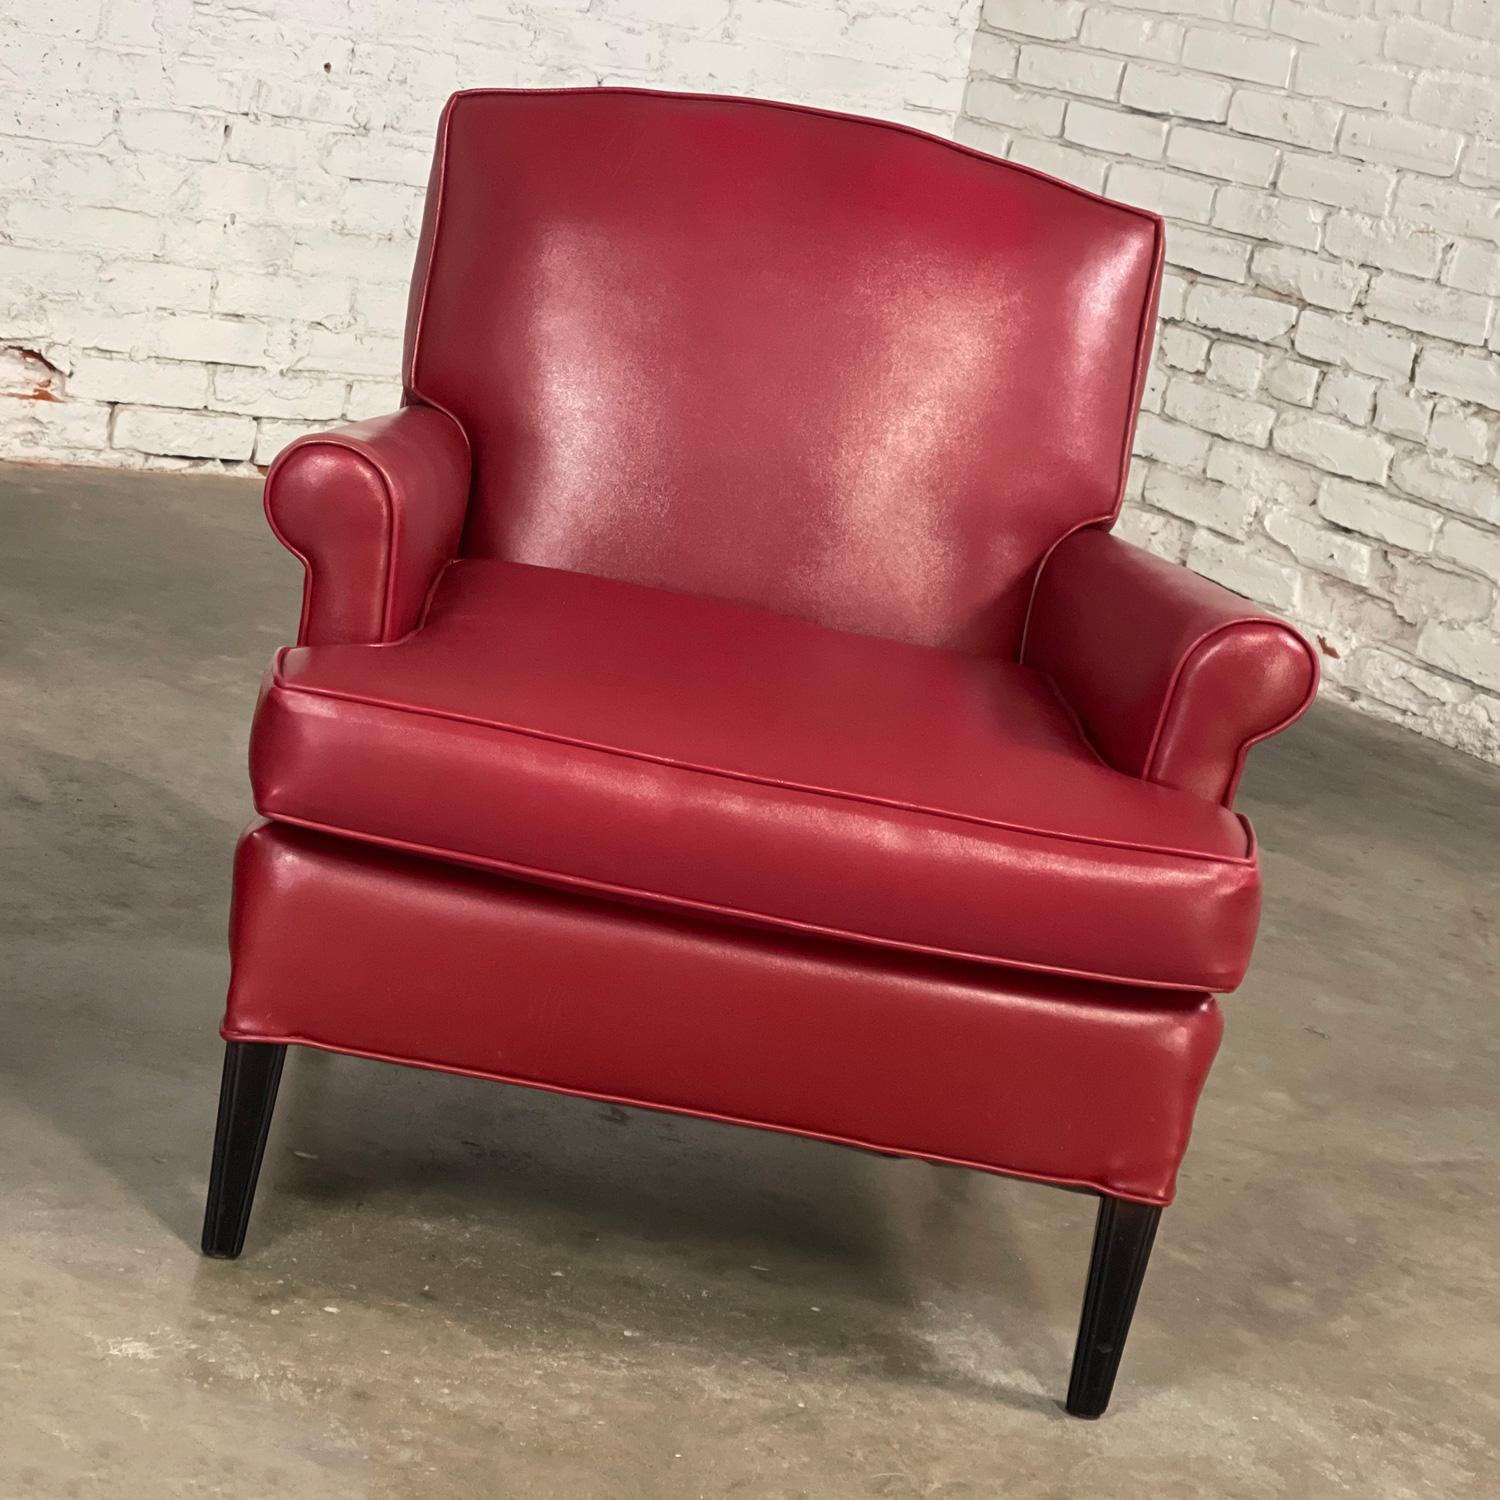 1940’s Traditional Club Chairs Original Red Faux Leather & Wood Legs a Pair For Sale 1